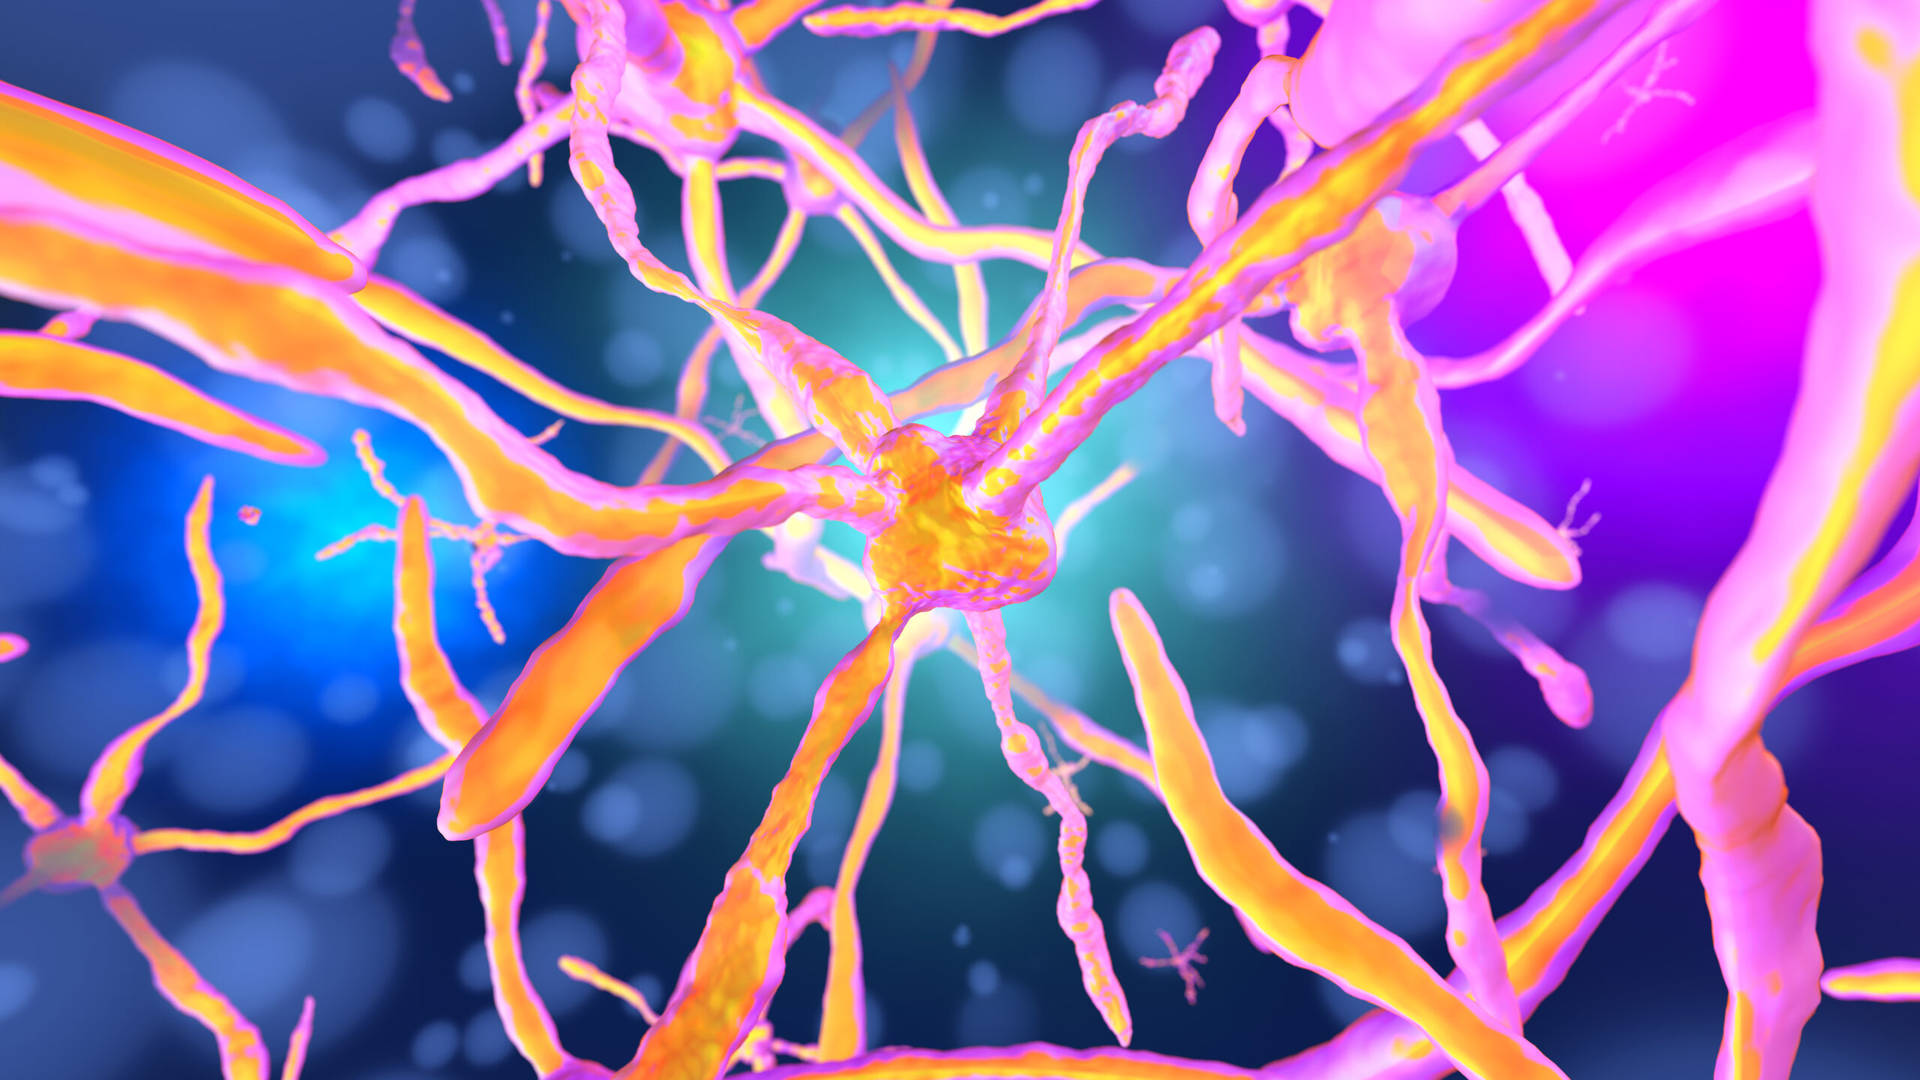 Glowing Volatile Neurons Up-close Wallpaper